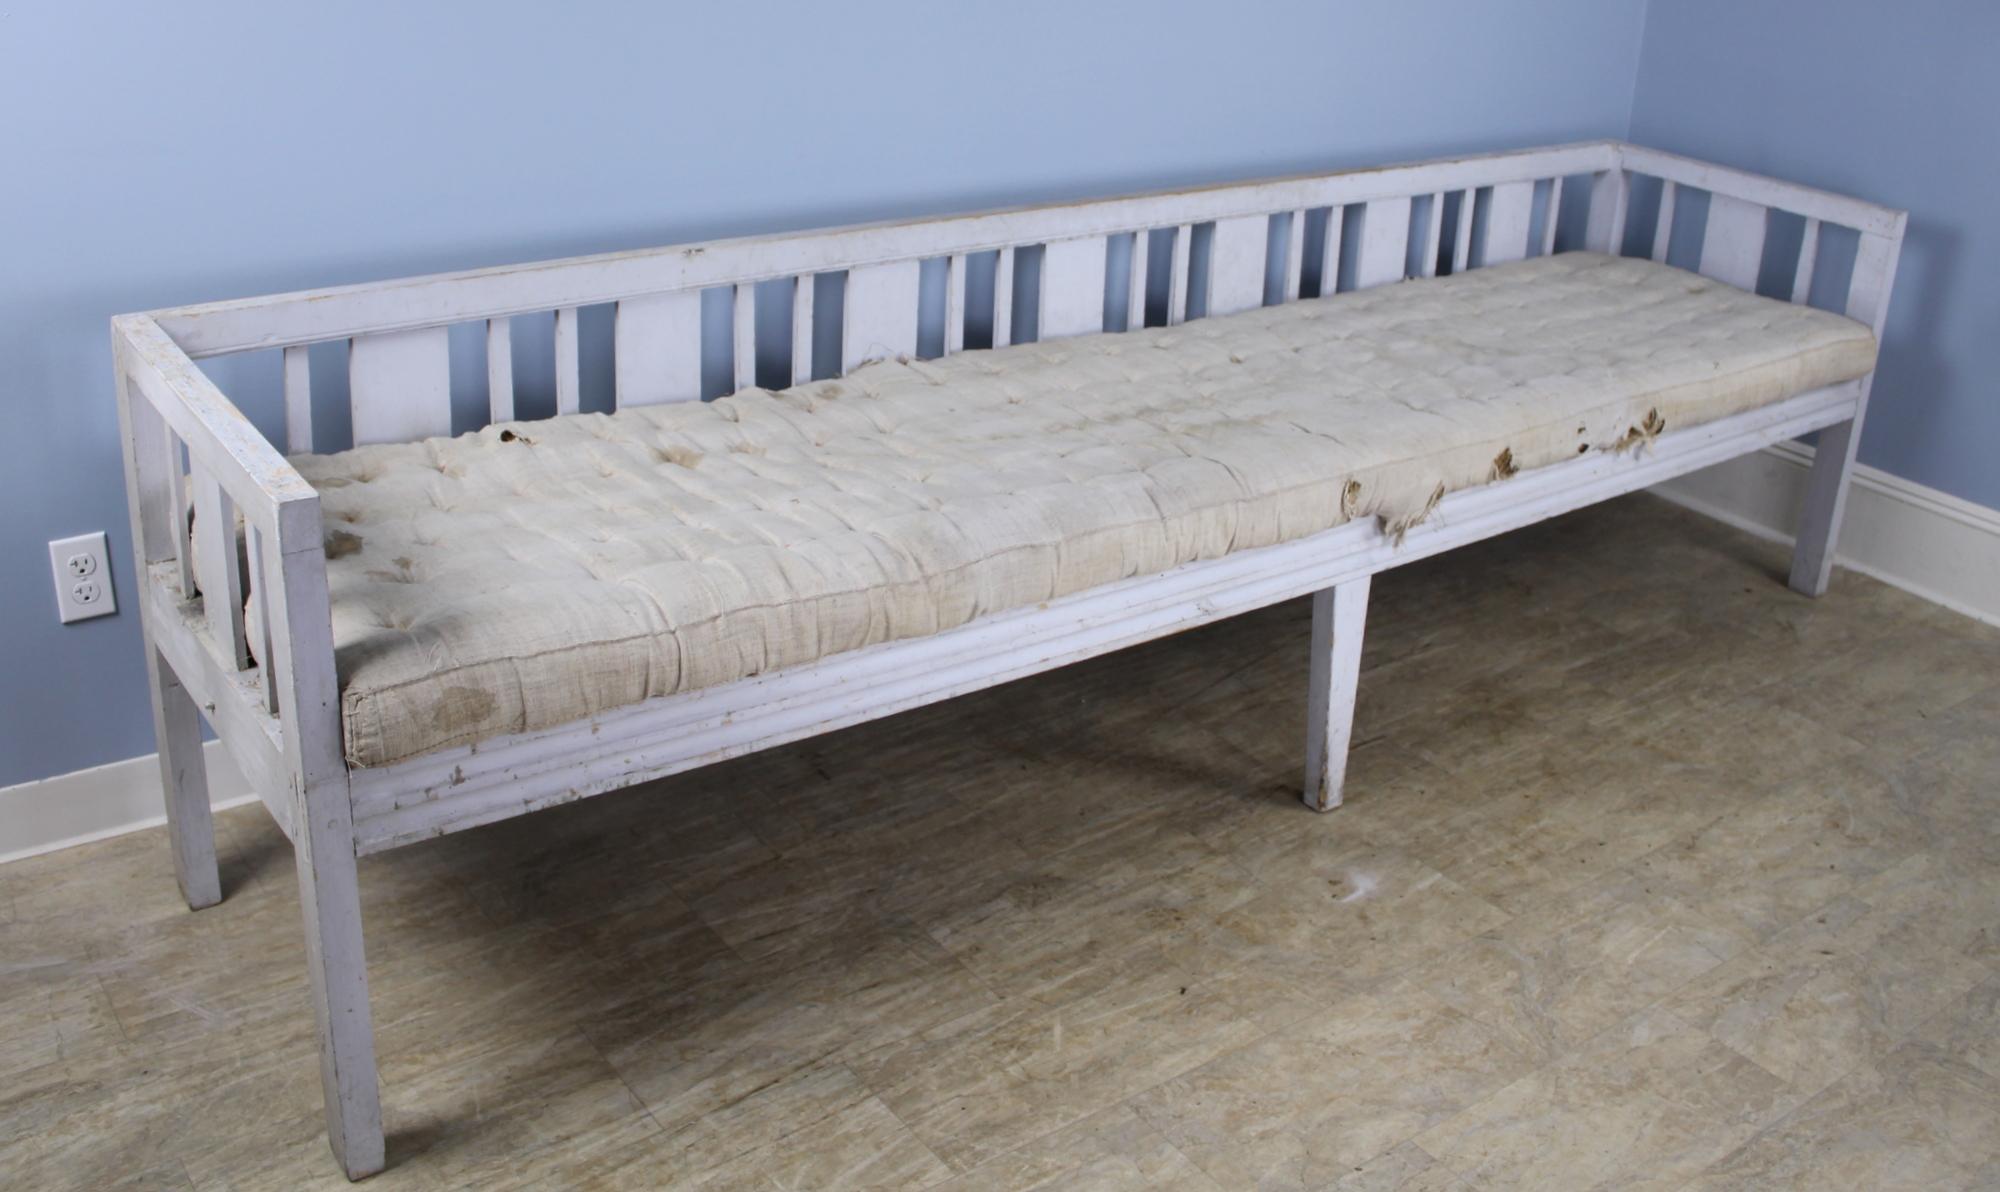 We don't see this kind of piece often. Quite early with exceptional proportions - almost 9.5 feet long with original paint and horse hair stuffed cushion, ready for reupholstery. This piece is very sturdy and resplendent with rustic charm. Has been